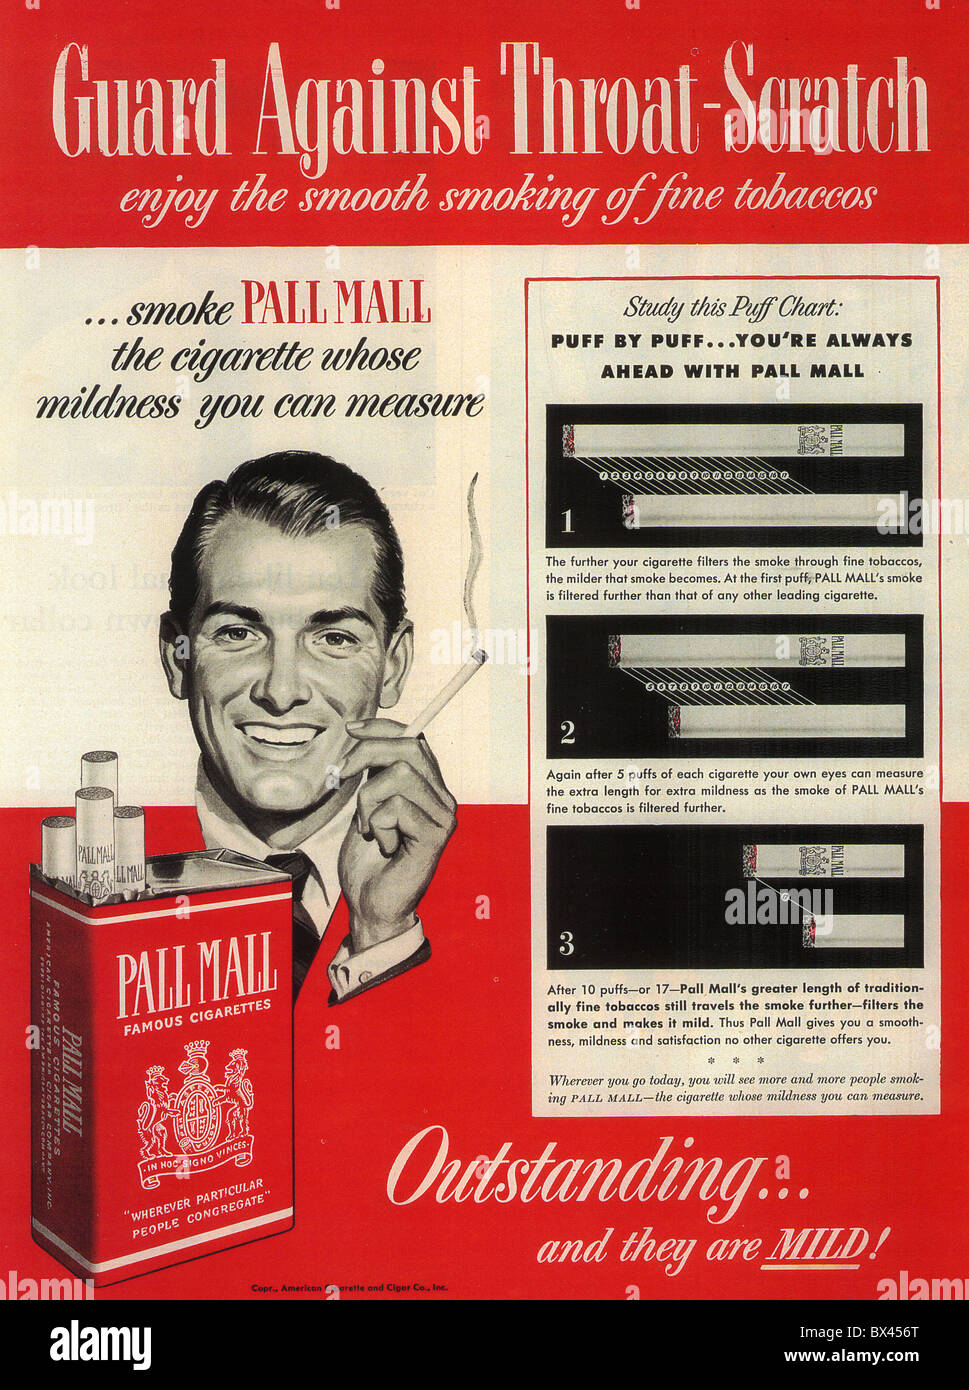 Pall Mall Tobacco Stock Photos & Pall Mall Tobacco Stock Images ...